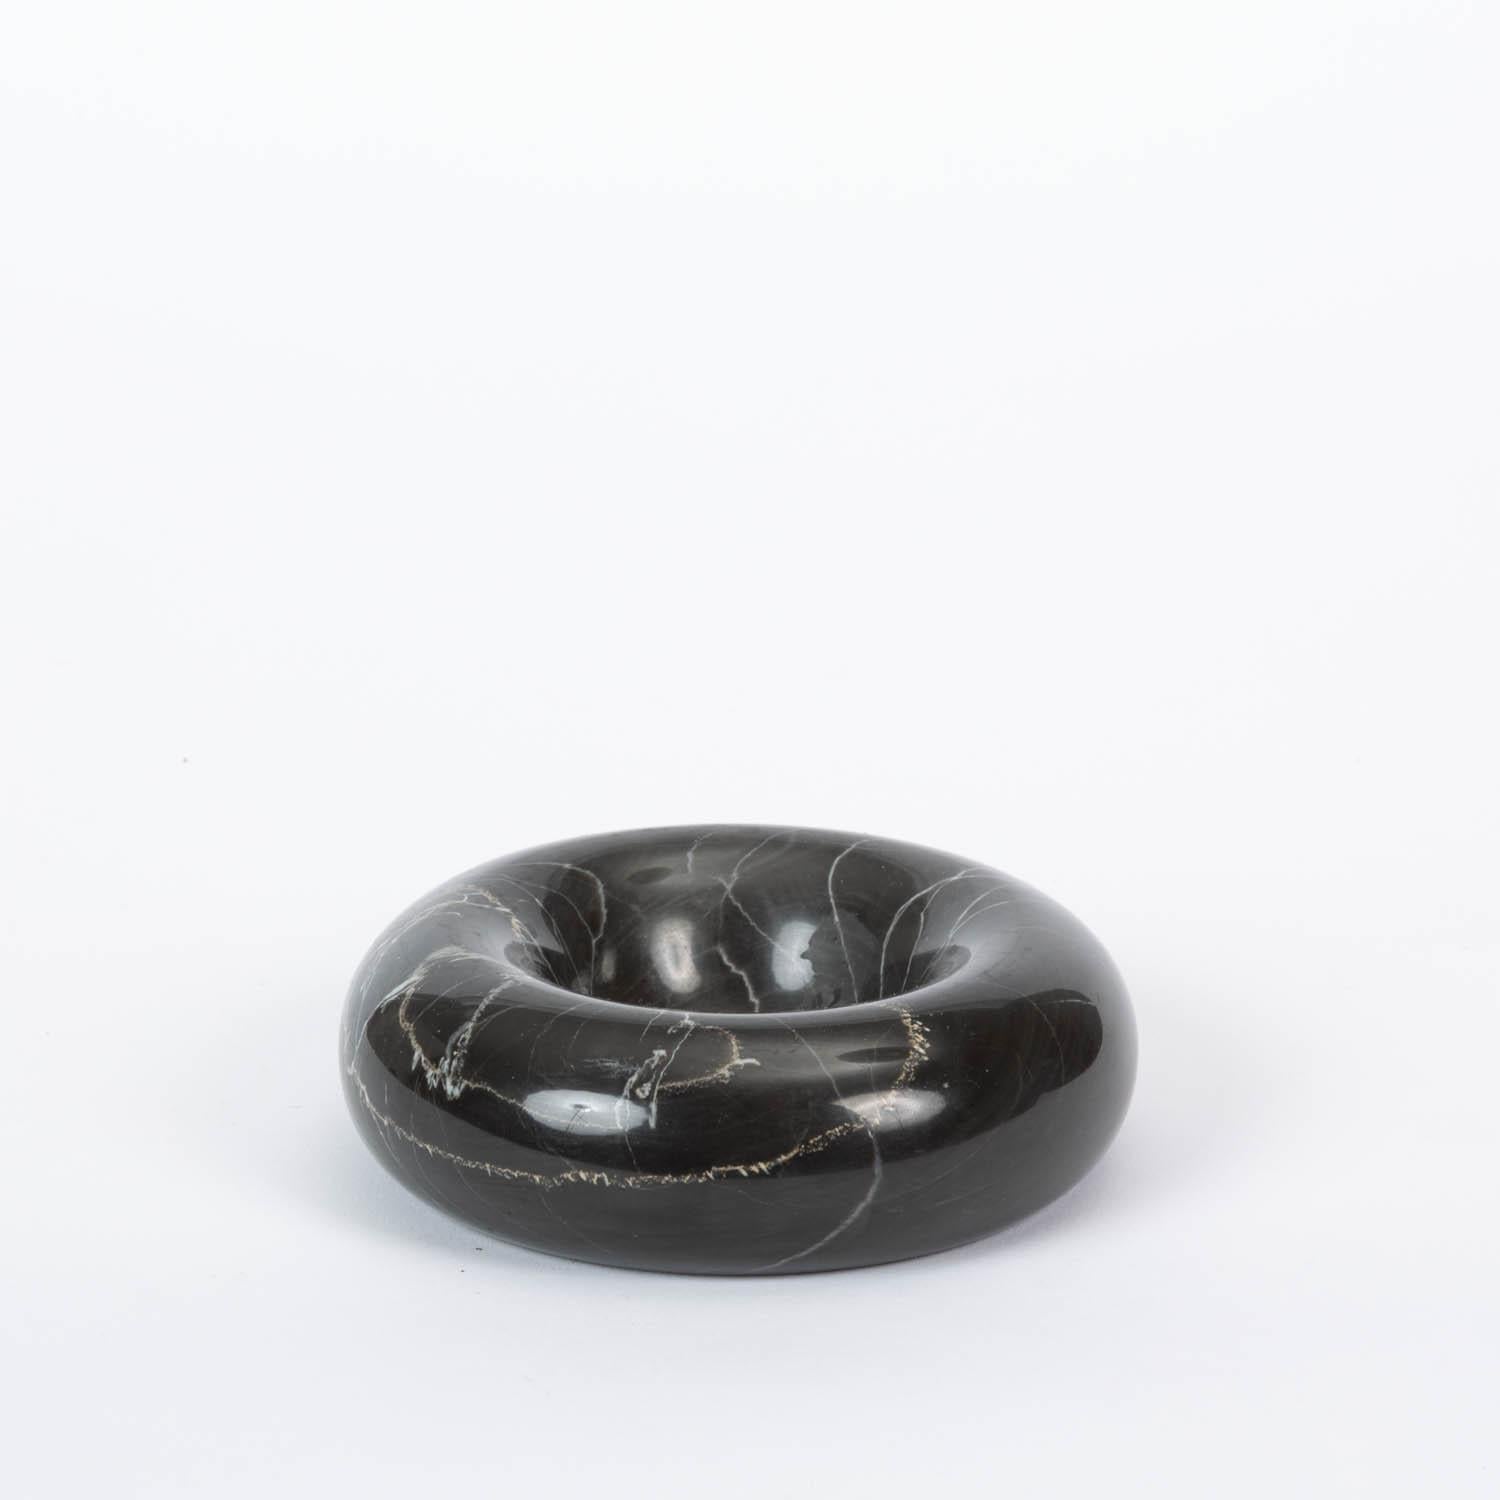 Polished Sergio Asti Marble Art Bowl for Up & Up